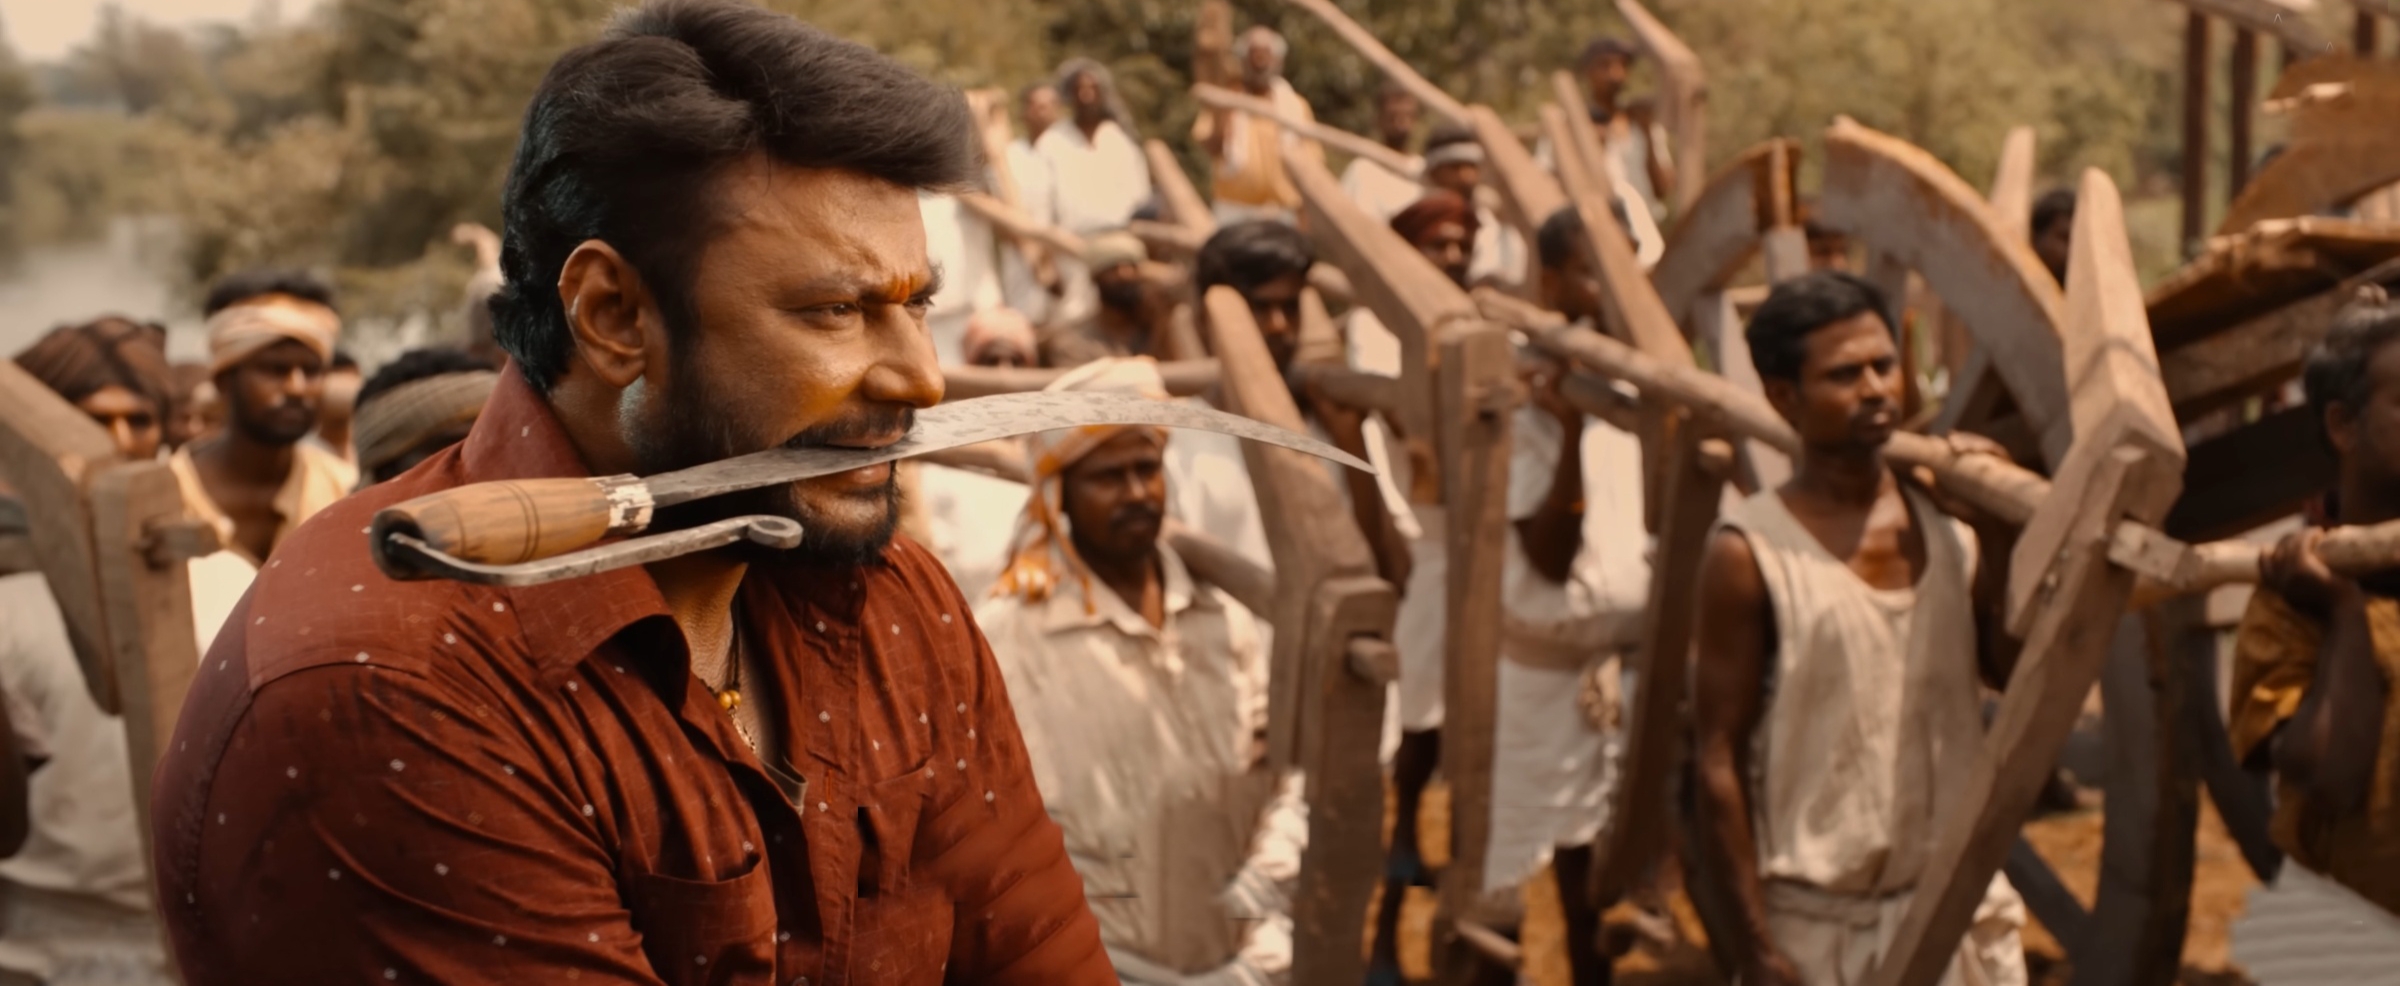 Darshan in ‘Kaatera’. | Photo Credit: Anand Audio/YouTube.